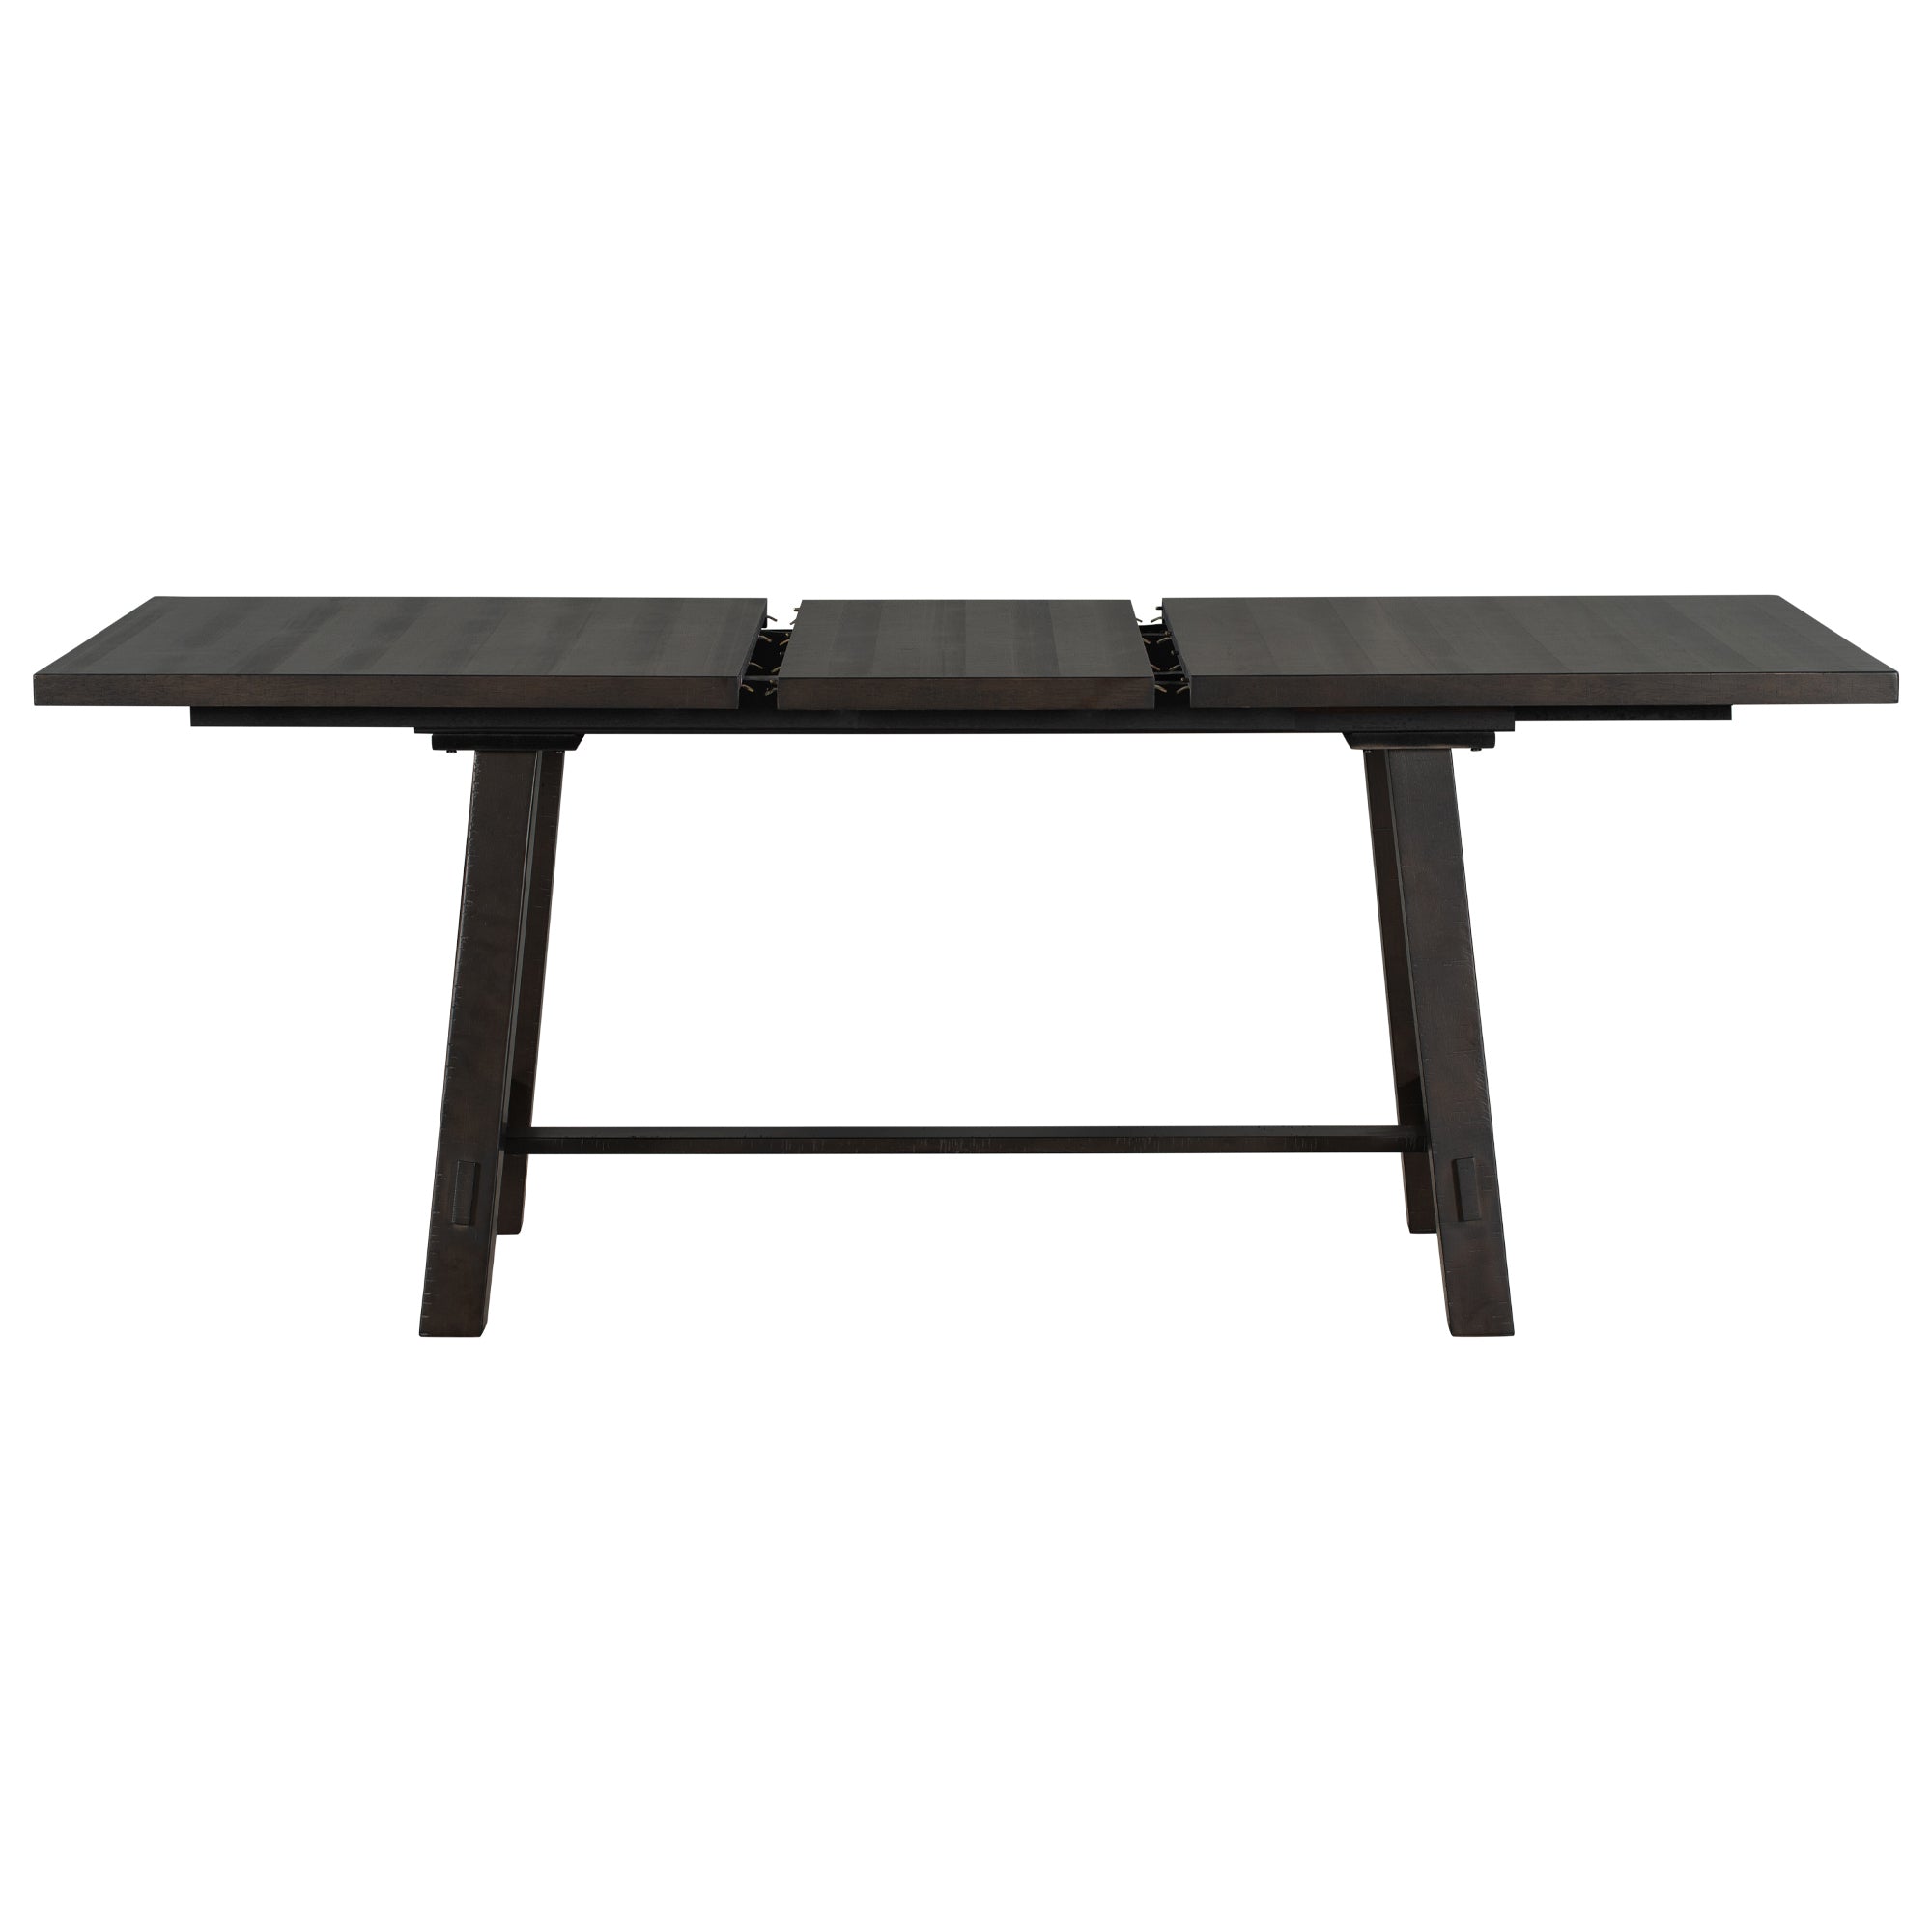 Retro Style Rectangular Dining Table Wood Extendable with 18" Leaf, Seats up to 8 - Espresso